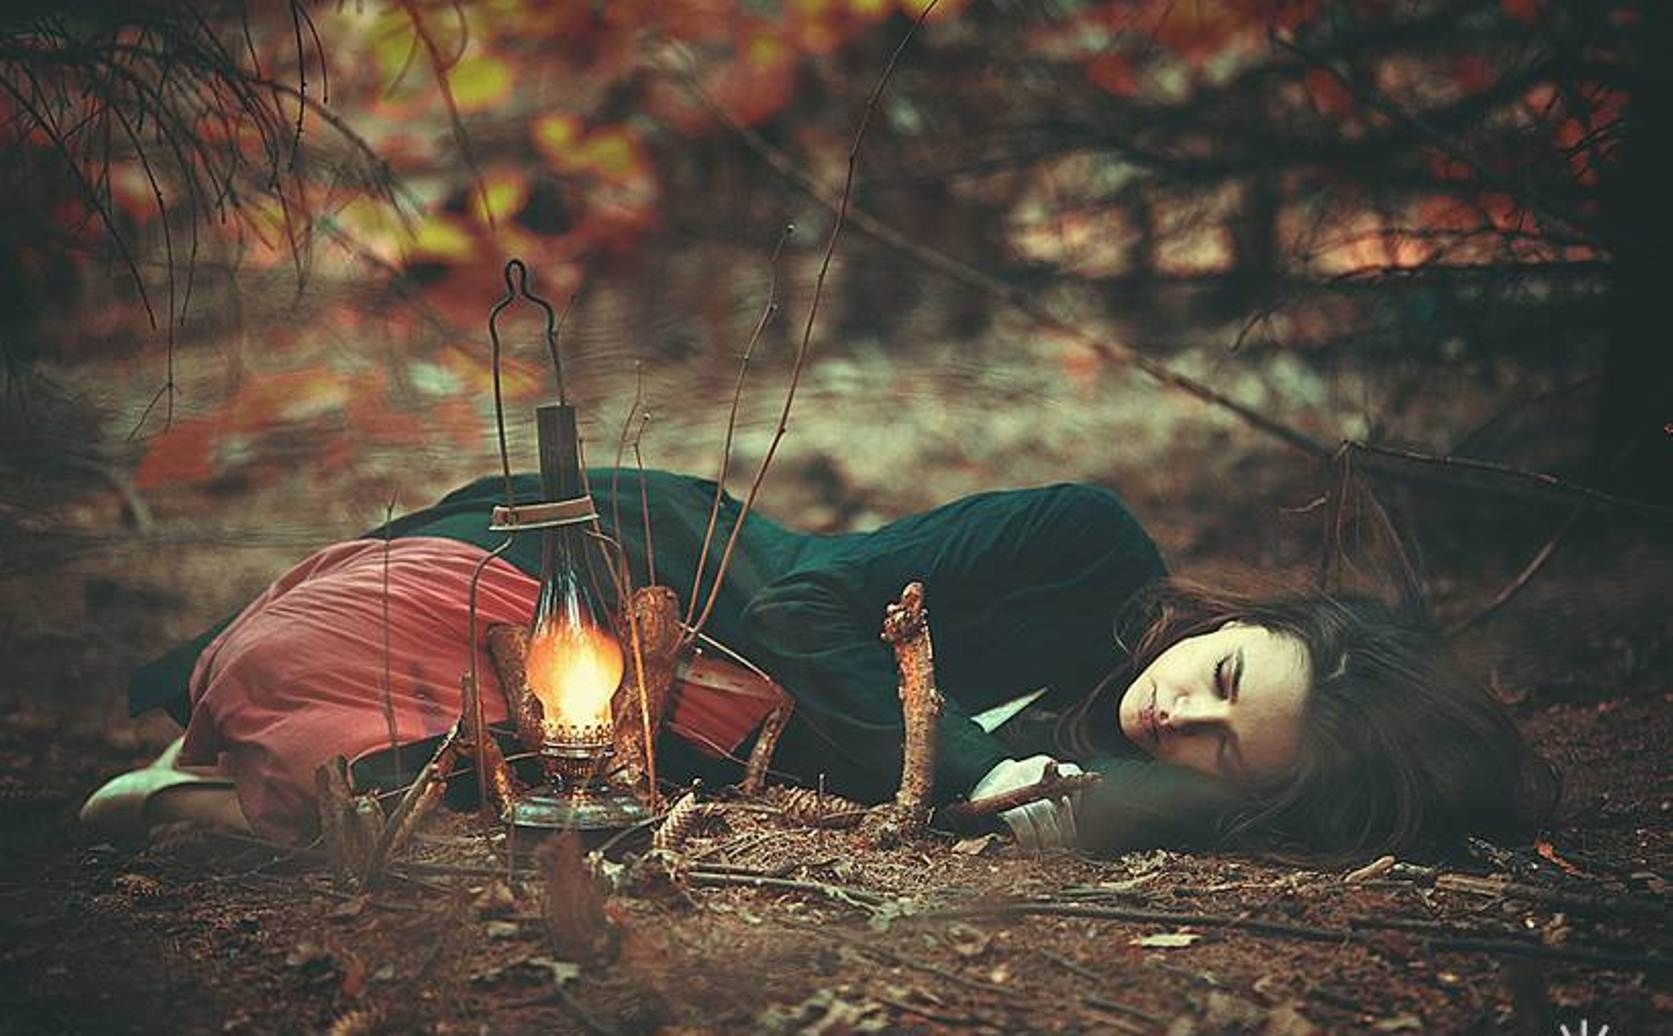 lamp, women, gothic, fall, forest, occult, oil lamp, witch